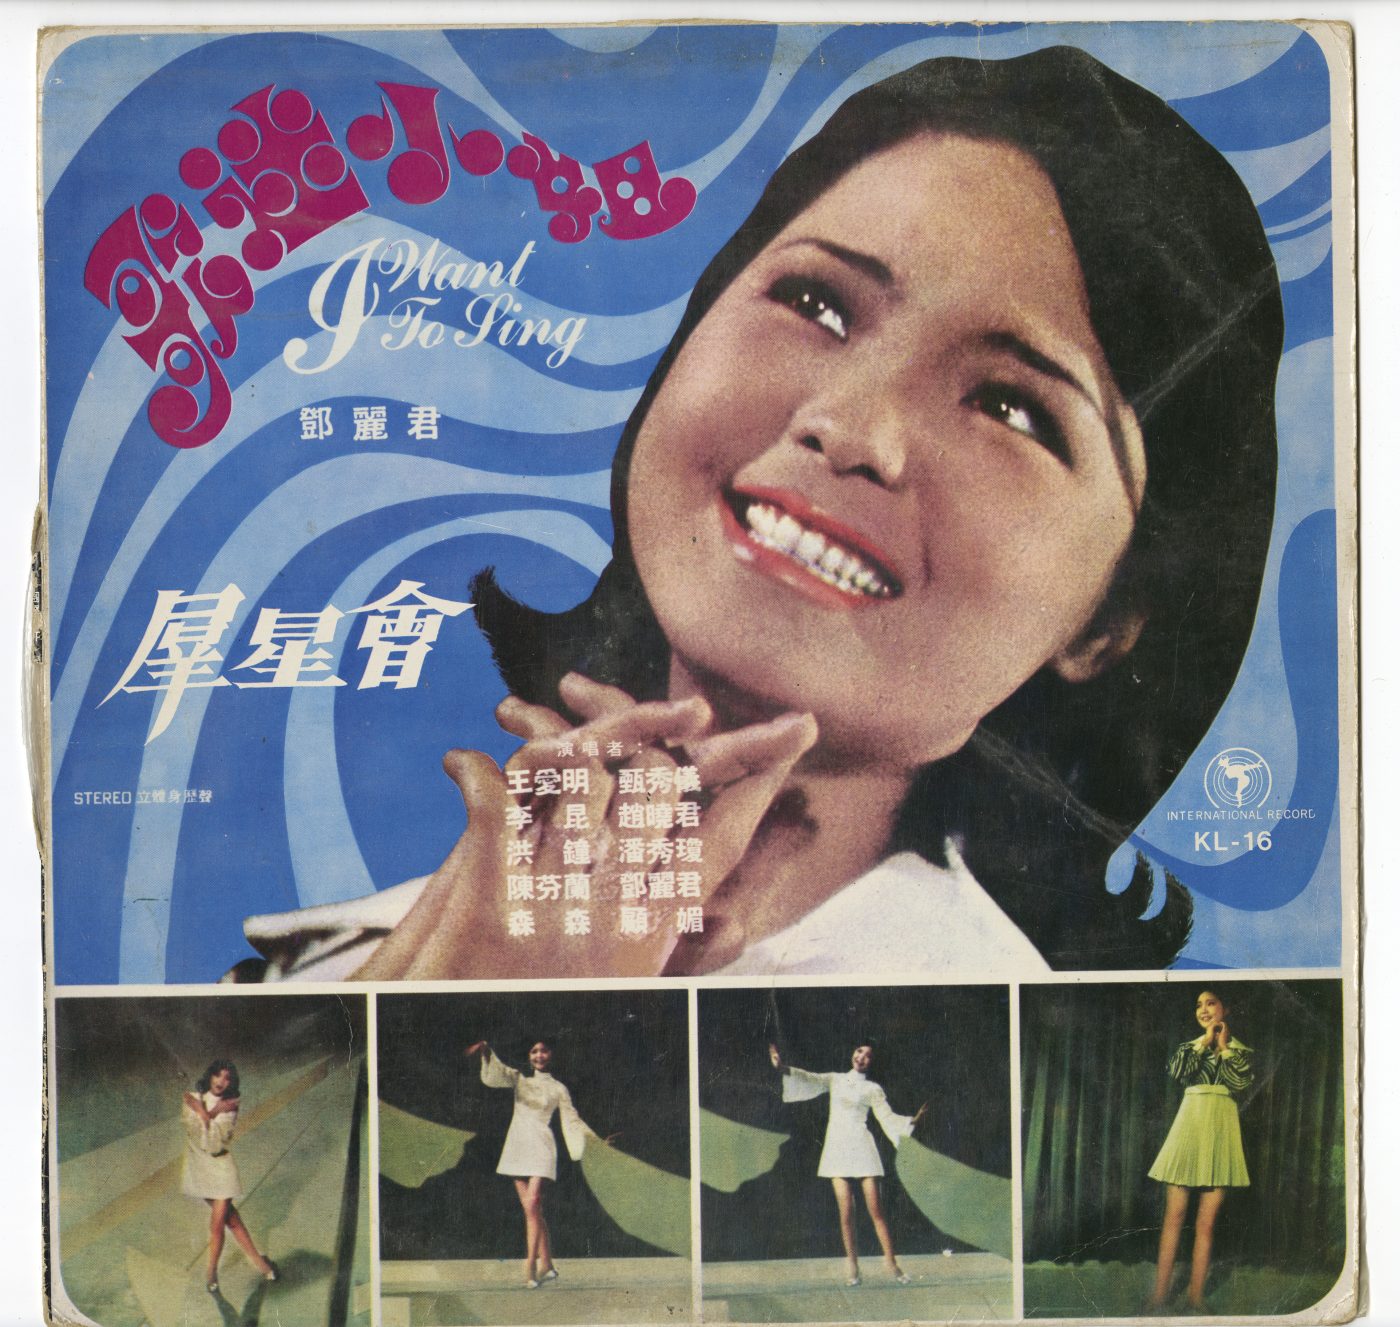 2022.038.019 - I want to Sing, featuring Wong Oi Ming, Hung Chung, Chen Fen Lan, et al. International Record KL-16. Courtesy of Choi "Nancy" Chan, Museum of Chinese in America (MOCA) Collection.